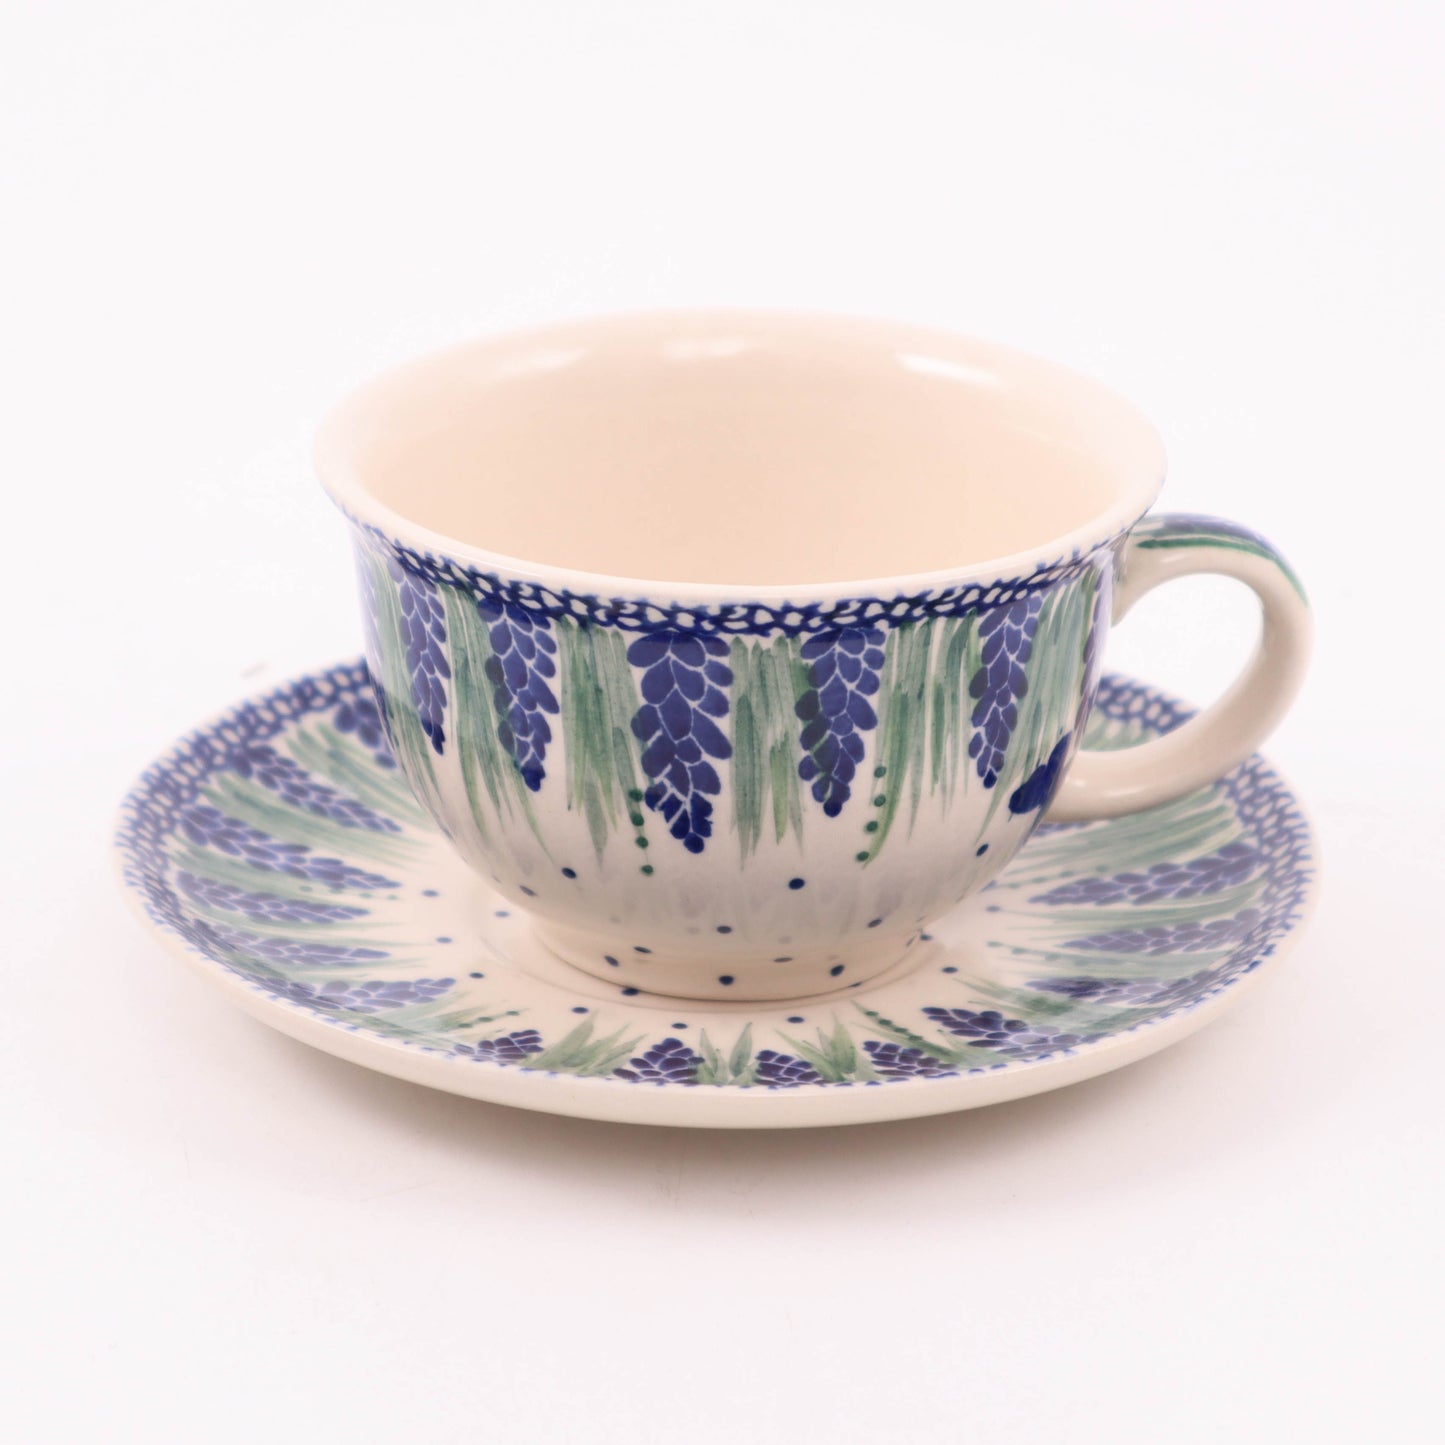 6oz Tea Cup and Saucer. Pattern: Lavender